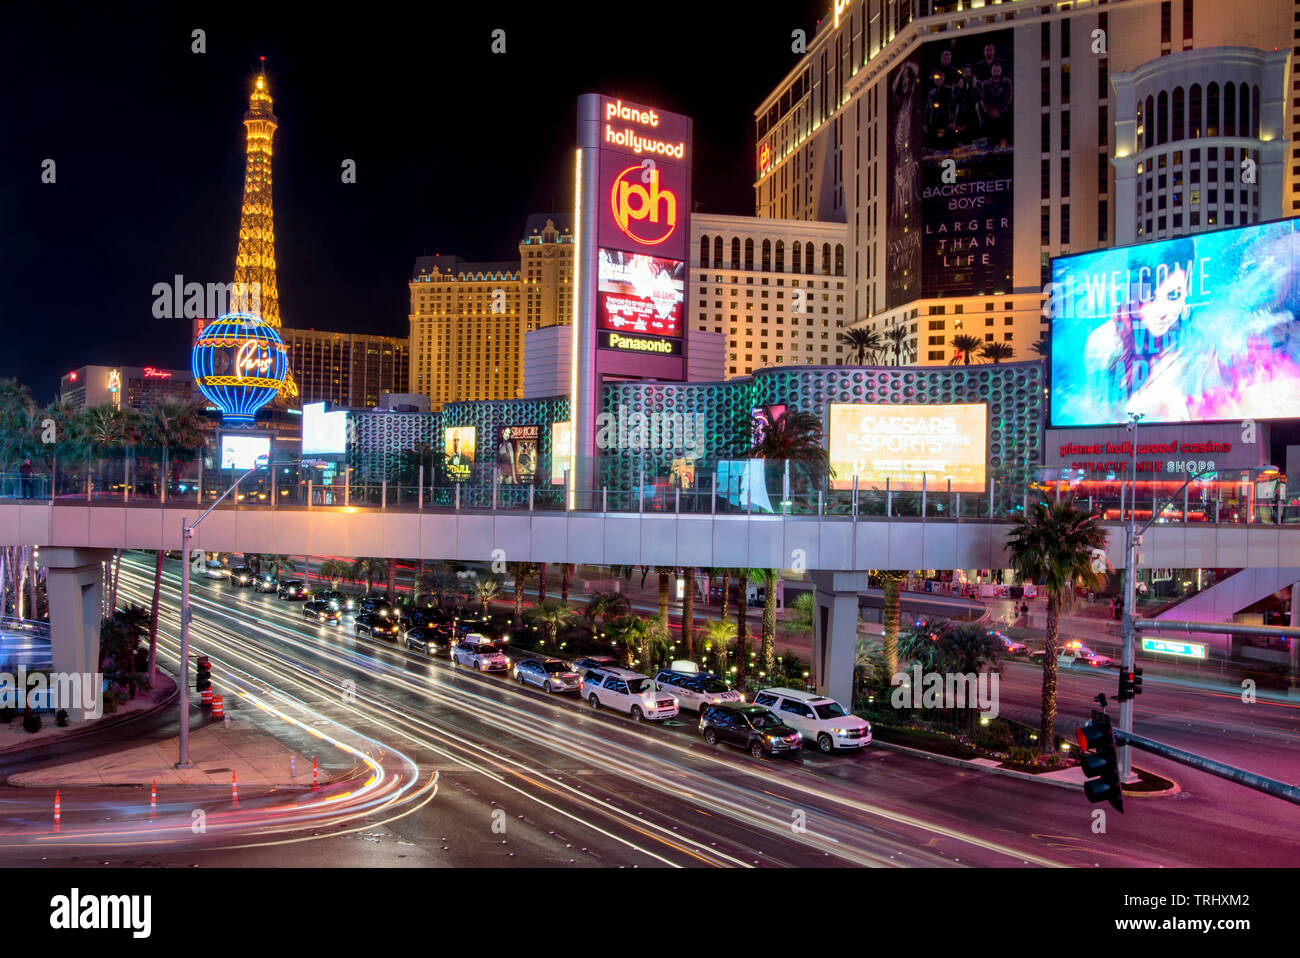 LAS VEGAS, NEVADA - FEB 1: Night scene at the strip in Las Vegas, Nevada on February 1, 2018. The city is famous for its many indulgences and vices, t Stock Photo